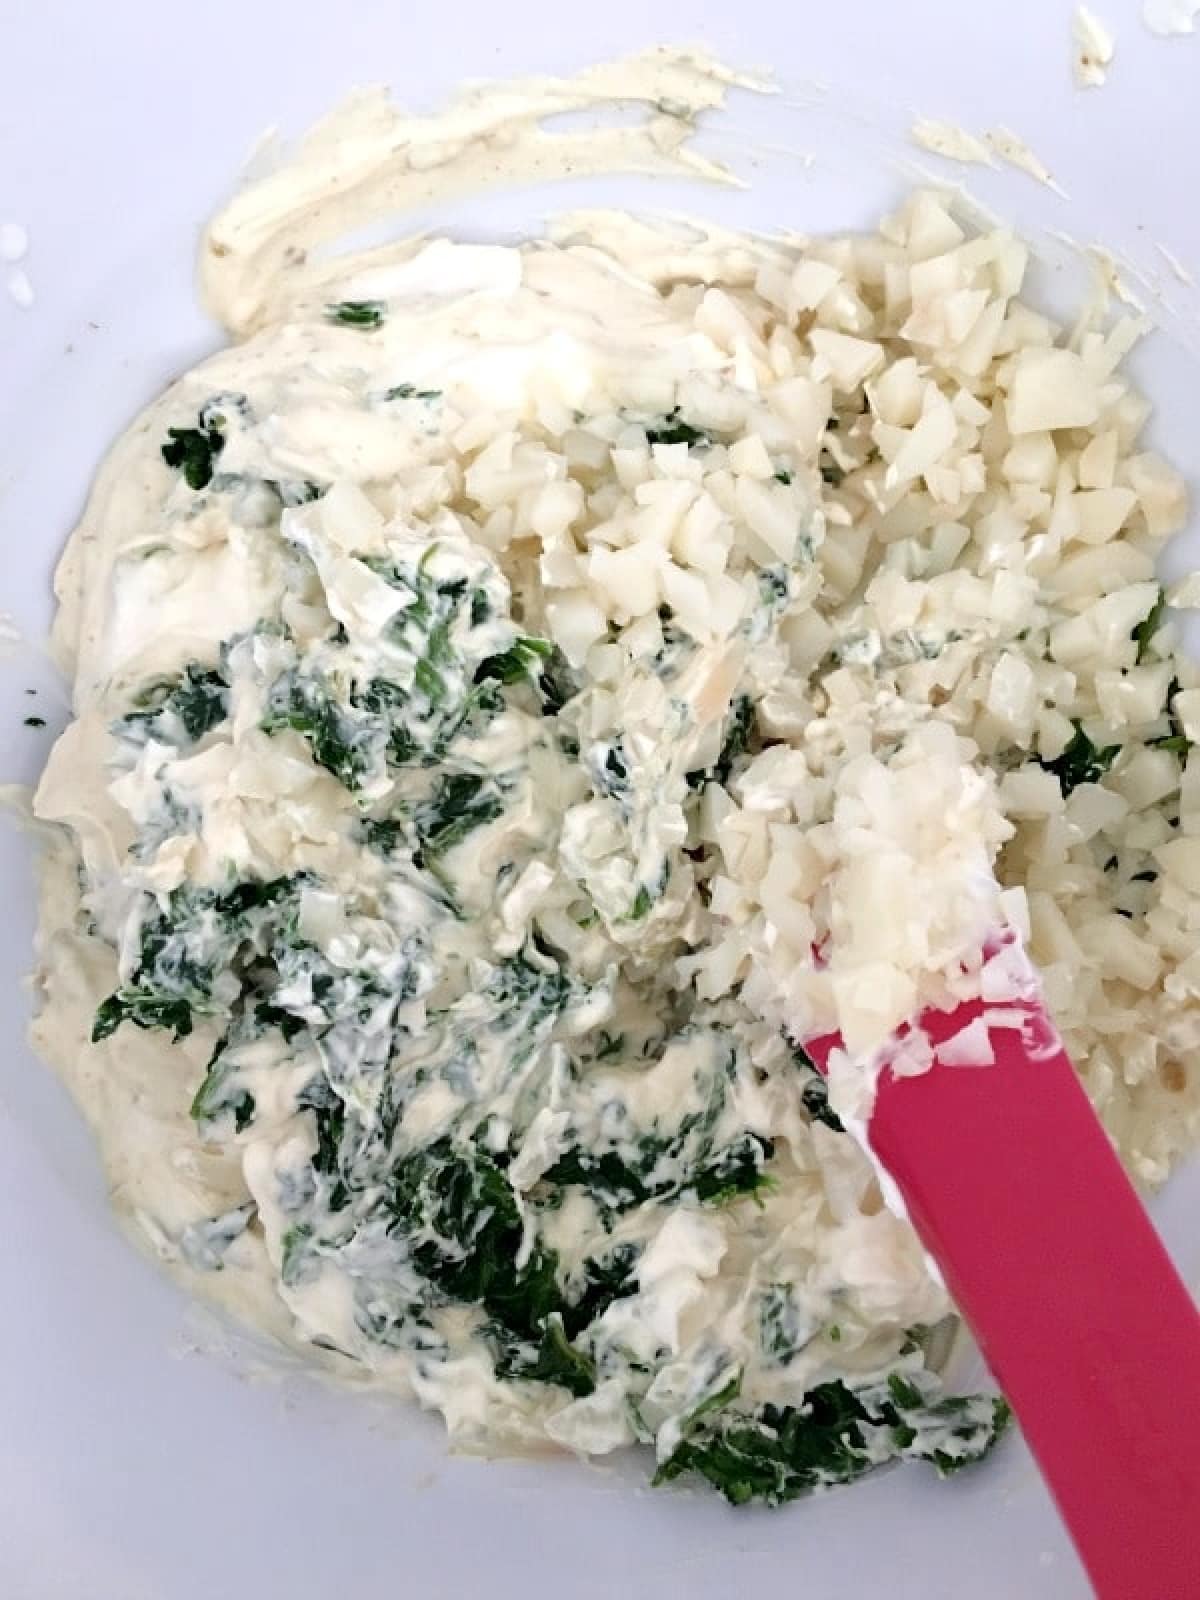 How To Make Spinach Dip: [cashew cream, defrosted chopped spinach, chopped water chestnuts, spices like dried garlic and onion powder] about to be stirred together in a bowl.